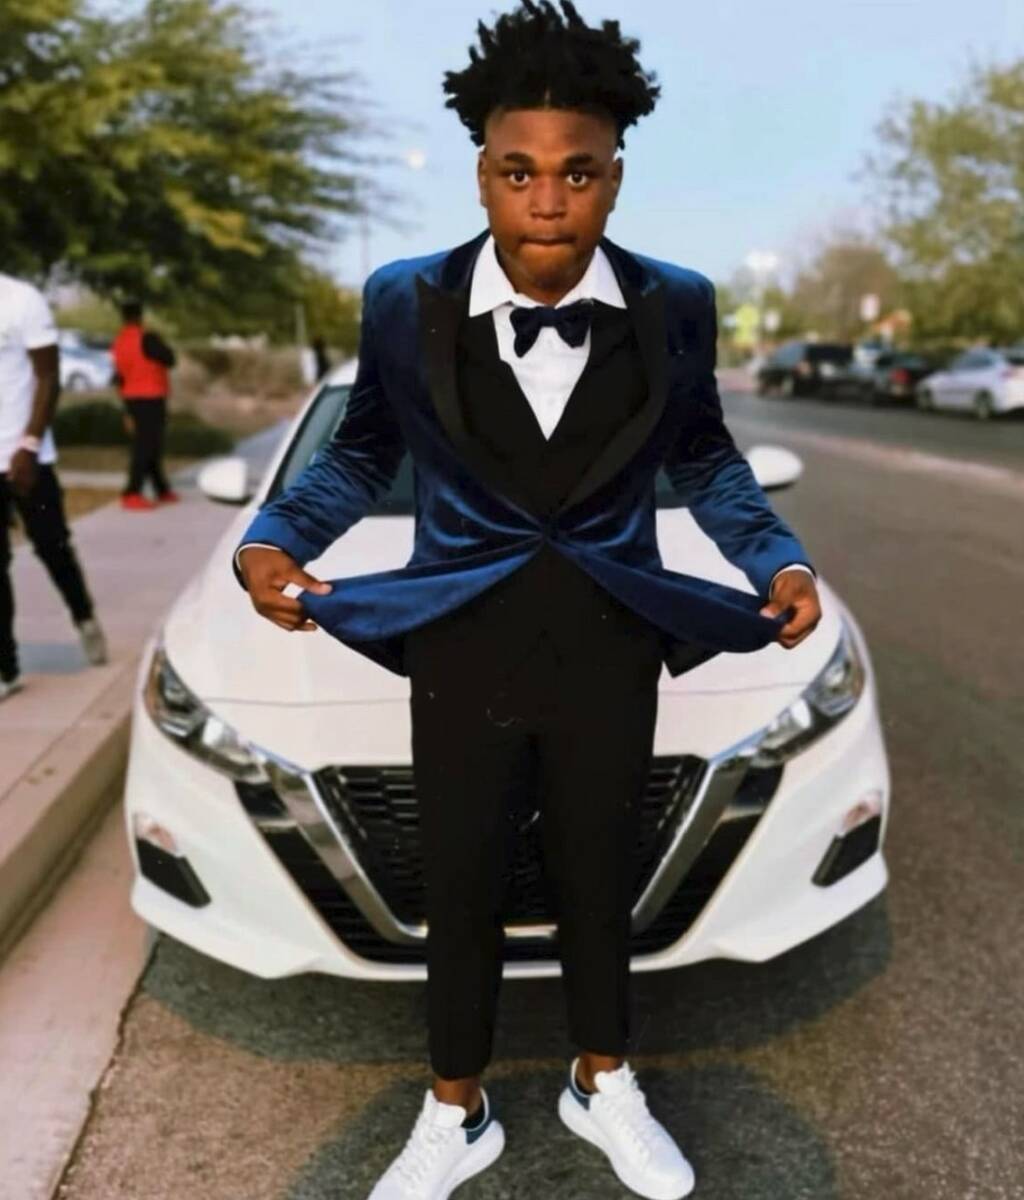 Omarion Wilson, 17, of North Las Vegas, was fatally shot on March 25, 2023. Wilson, who wore th ...